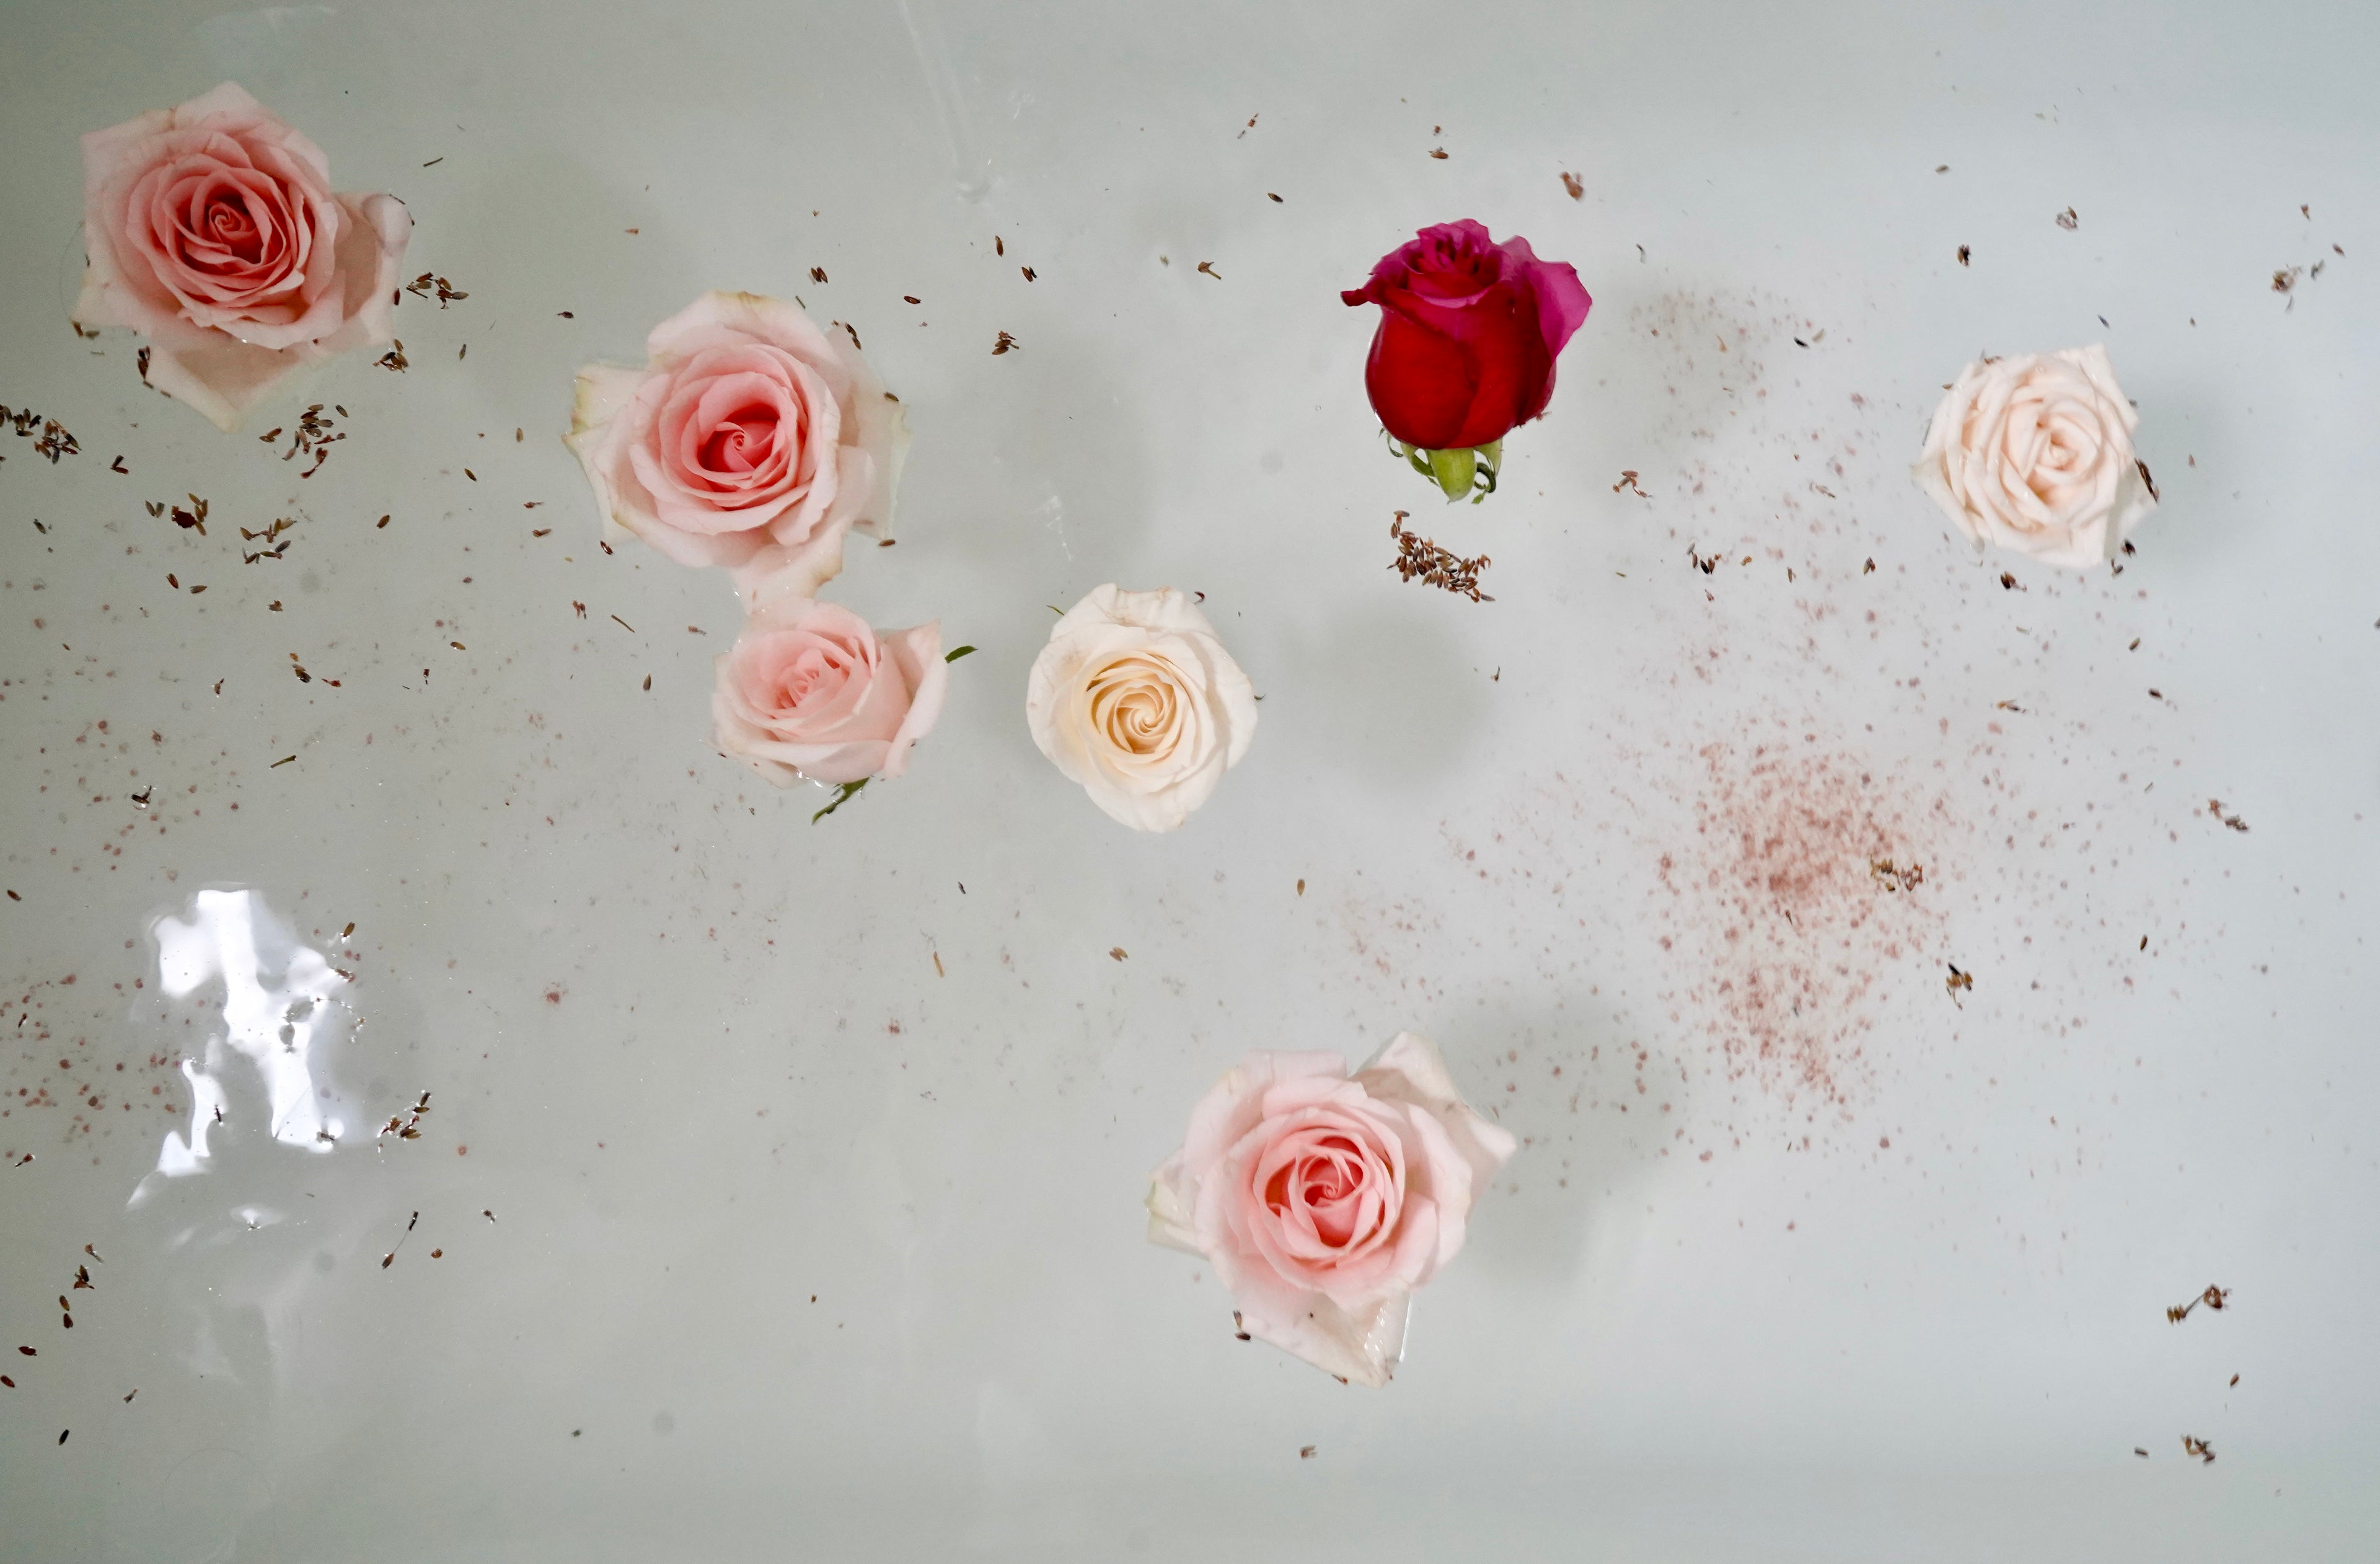 Pink and white roses float in water with pink bath salts | Image by Lacey Woodroof forr Nourish & Refine Clean Skincare